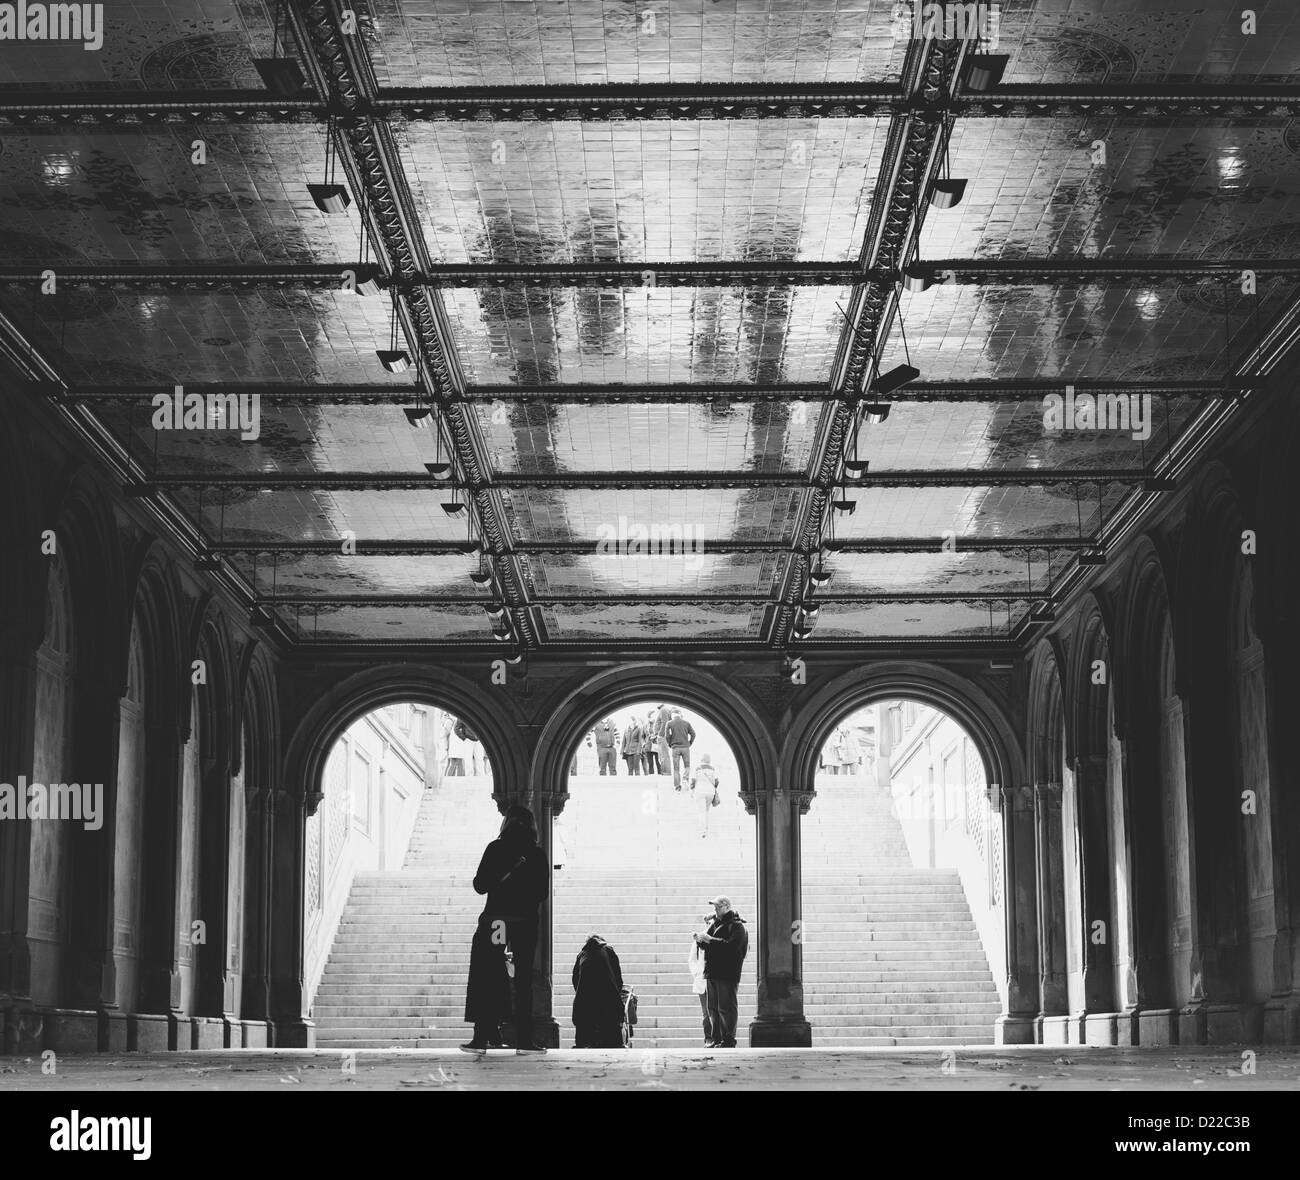 The Lower Level of Bethesda Terrace, Central Park. Stock Photo